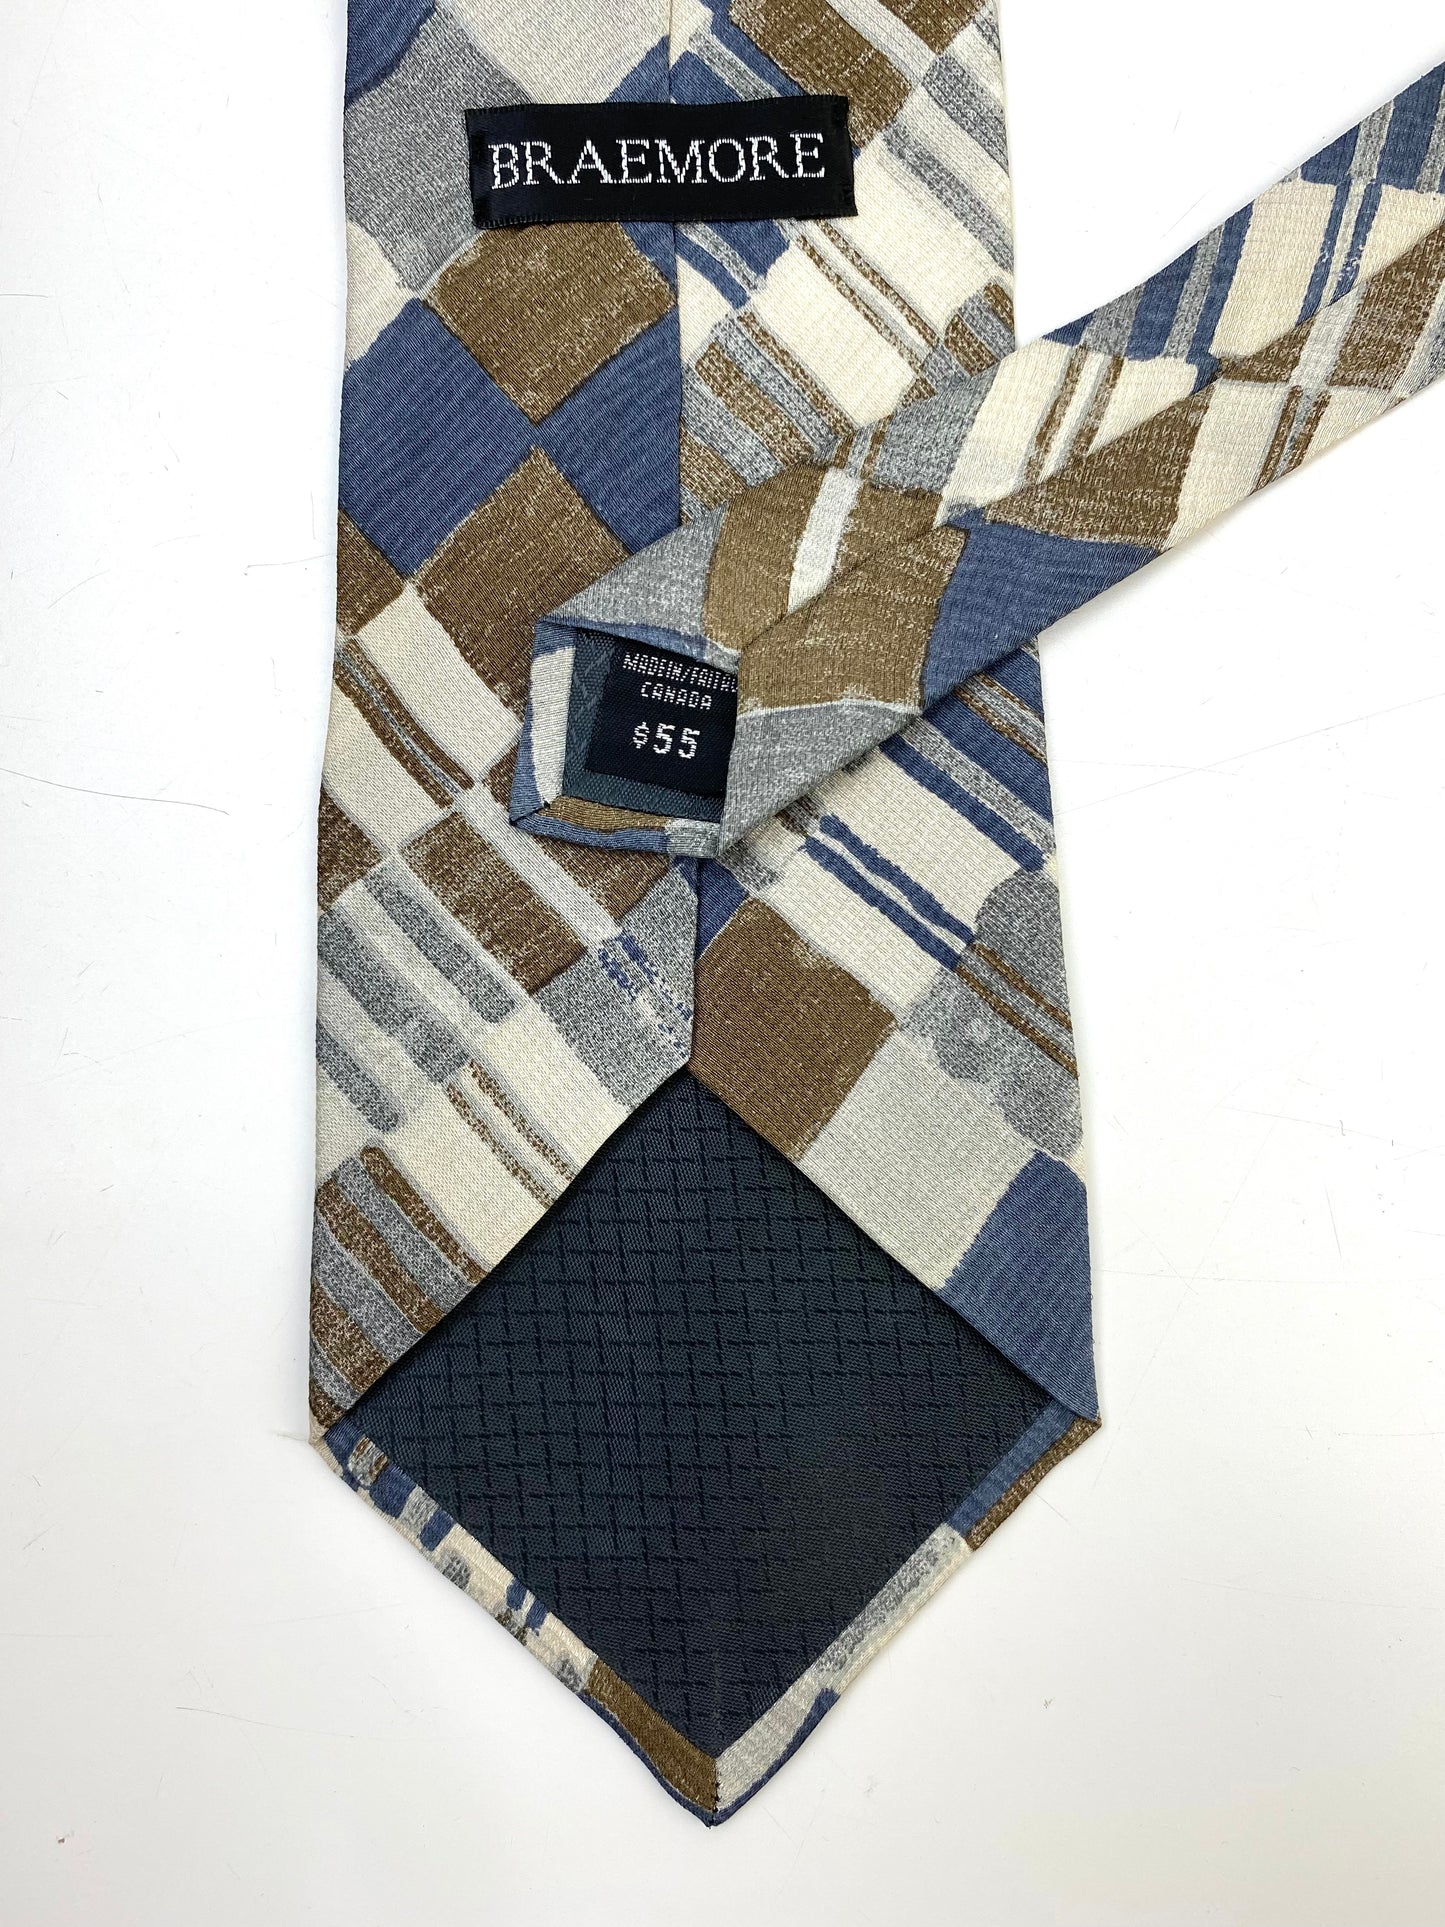 Back and labels of: 90s Deadstock Silk Necktie, Men's Vintage Taupe/ Blue/ Cream Check Pattern Tie, NOS